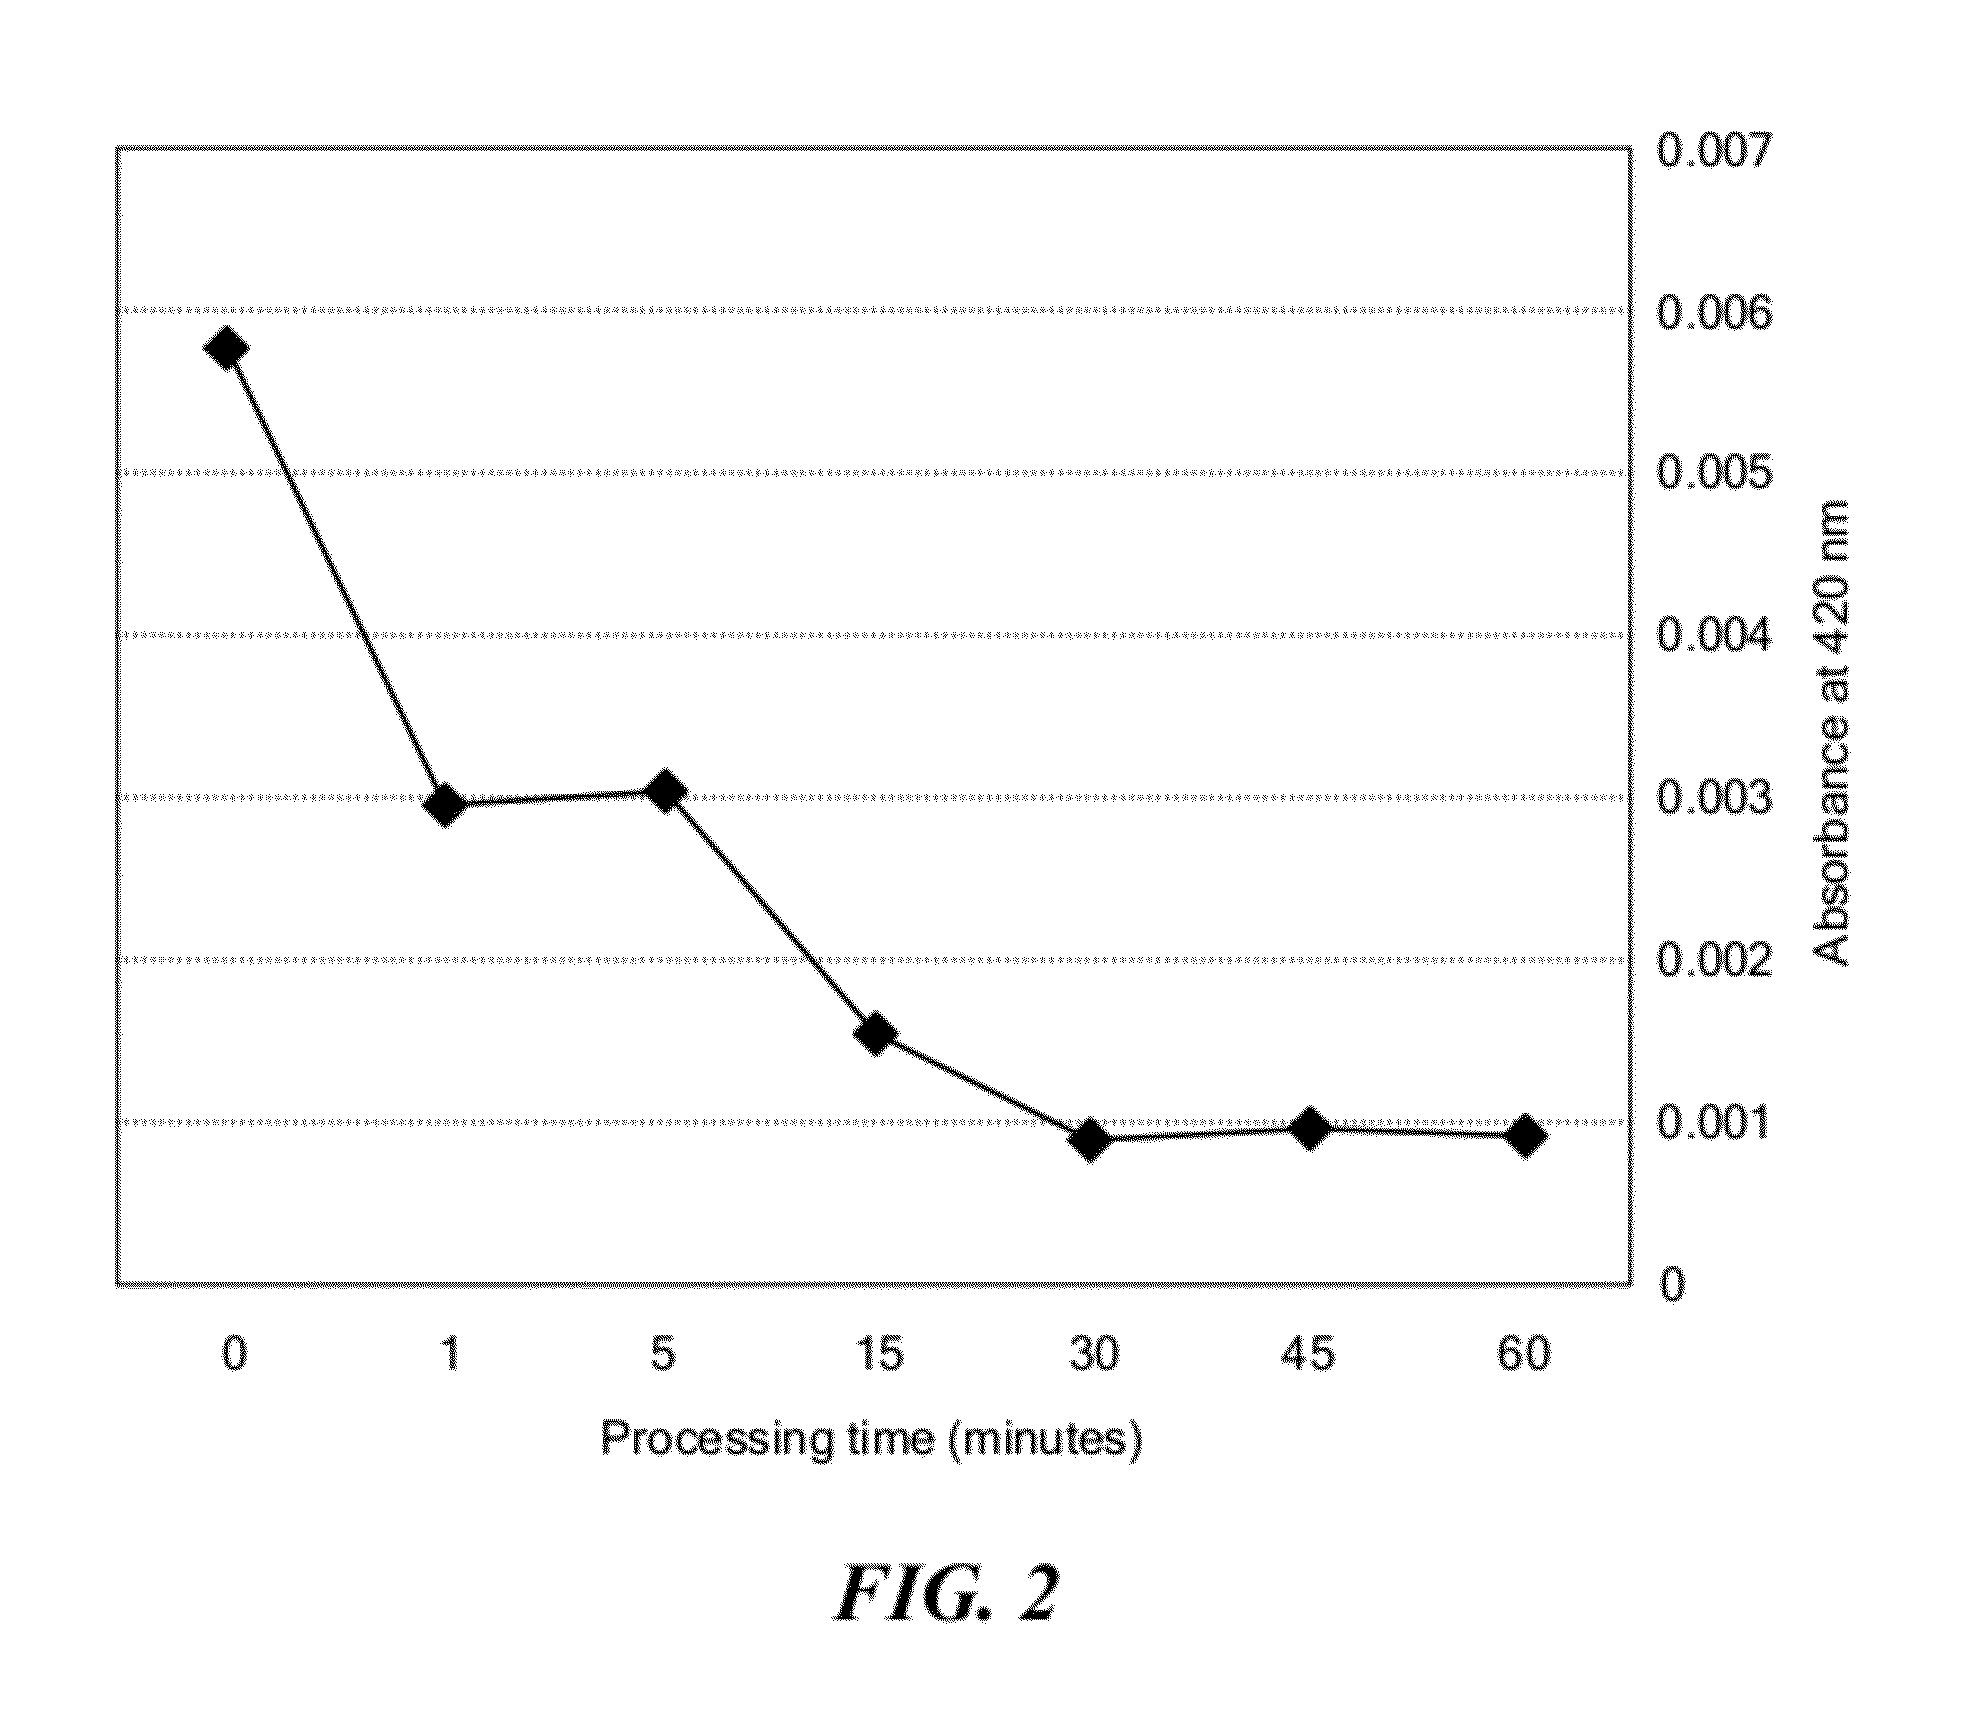 Method of treating solid and semi-solid foods to reduce microorganisms and enzymes in the food